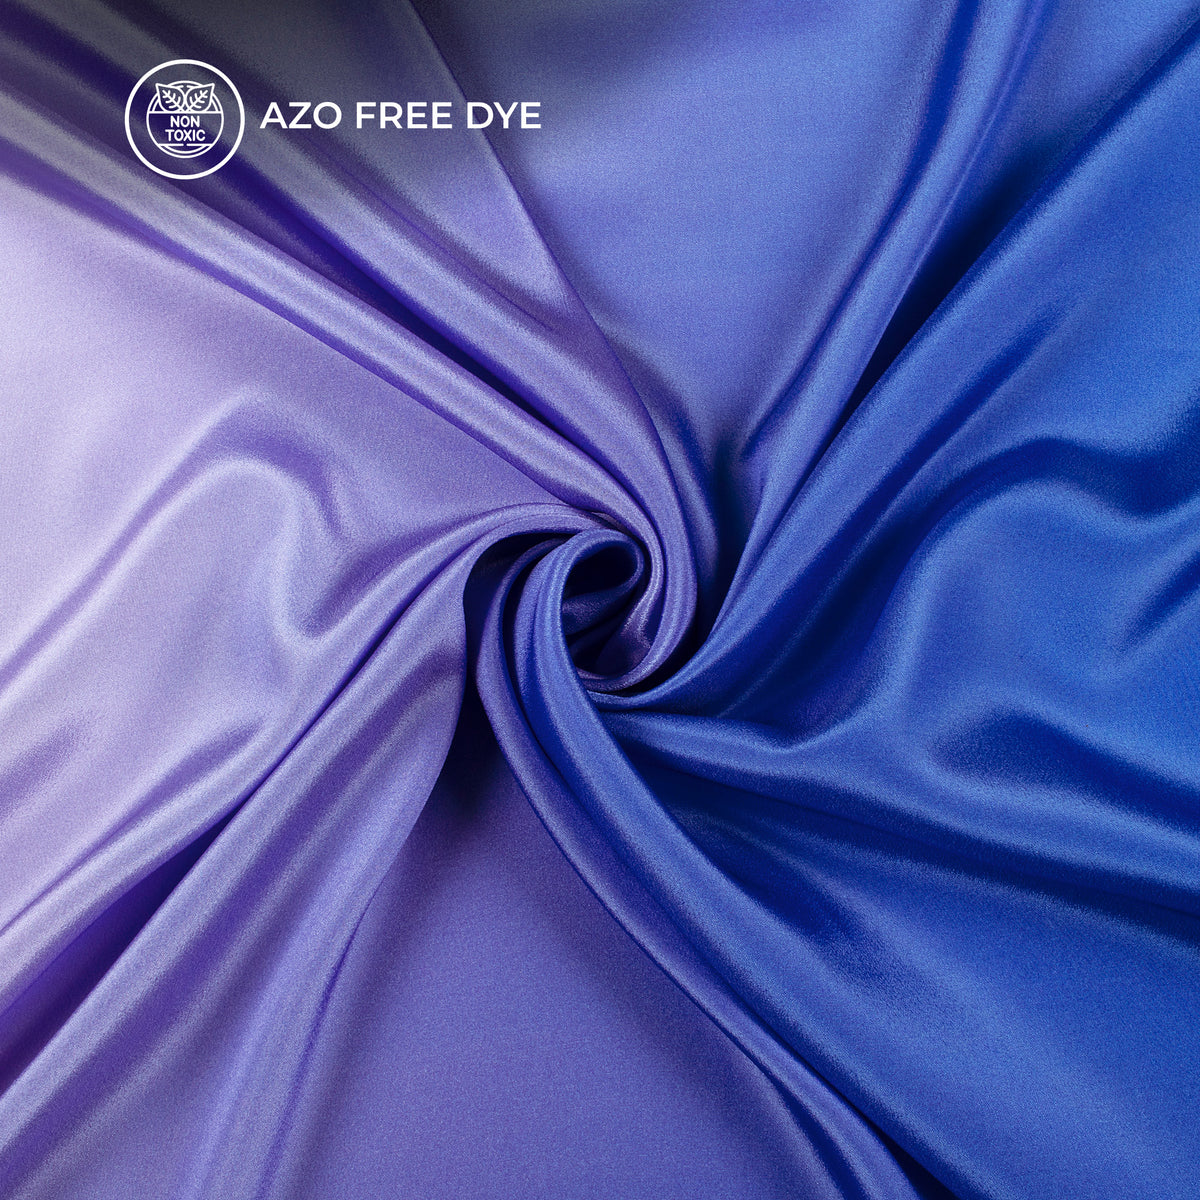 Aetherial Charm: Attrective Ombre Digital Print Crepe Silk Fabric